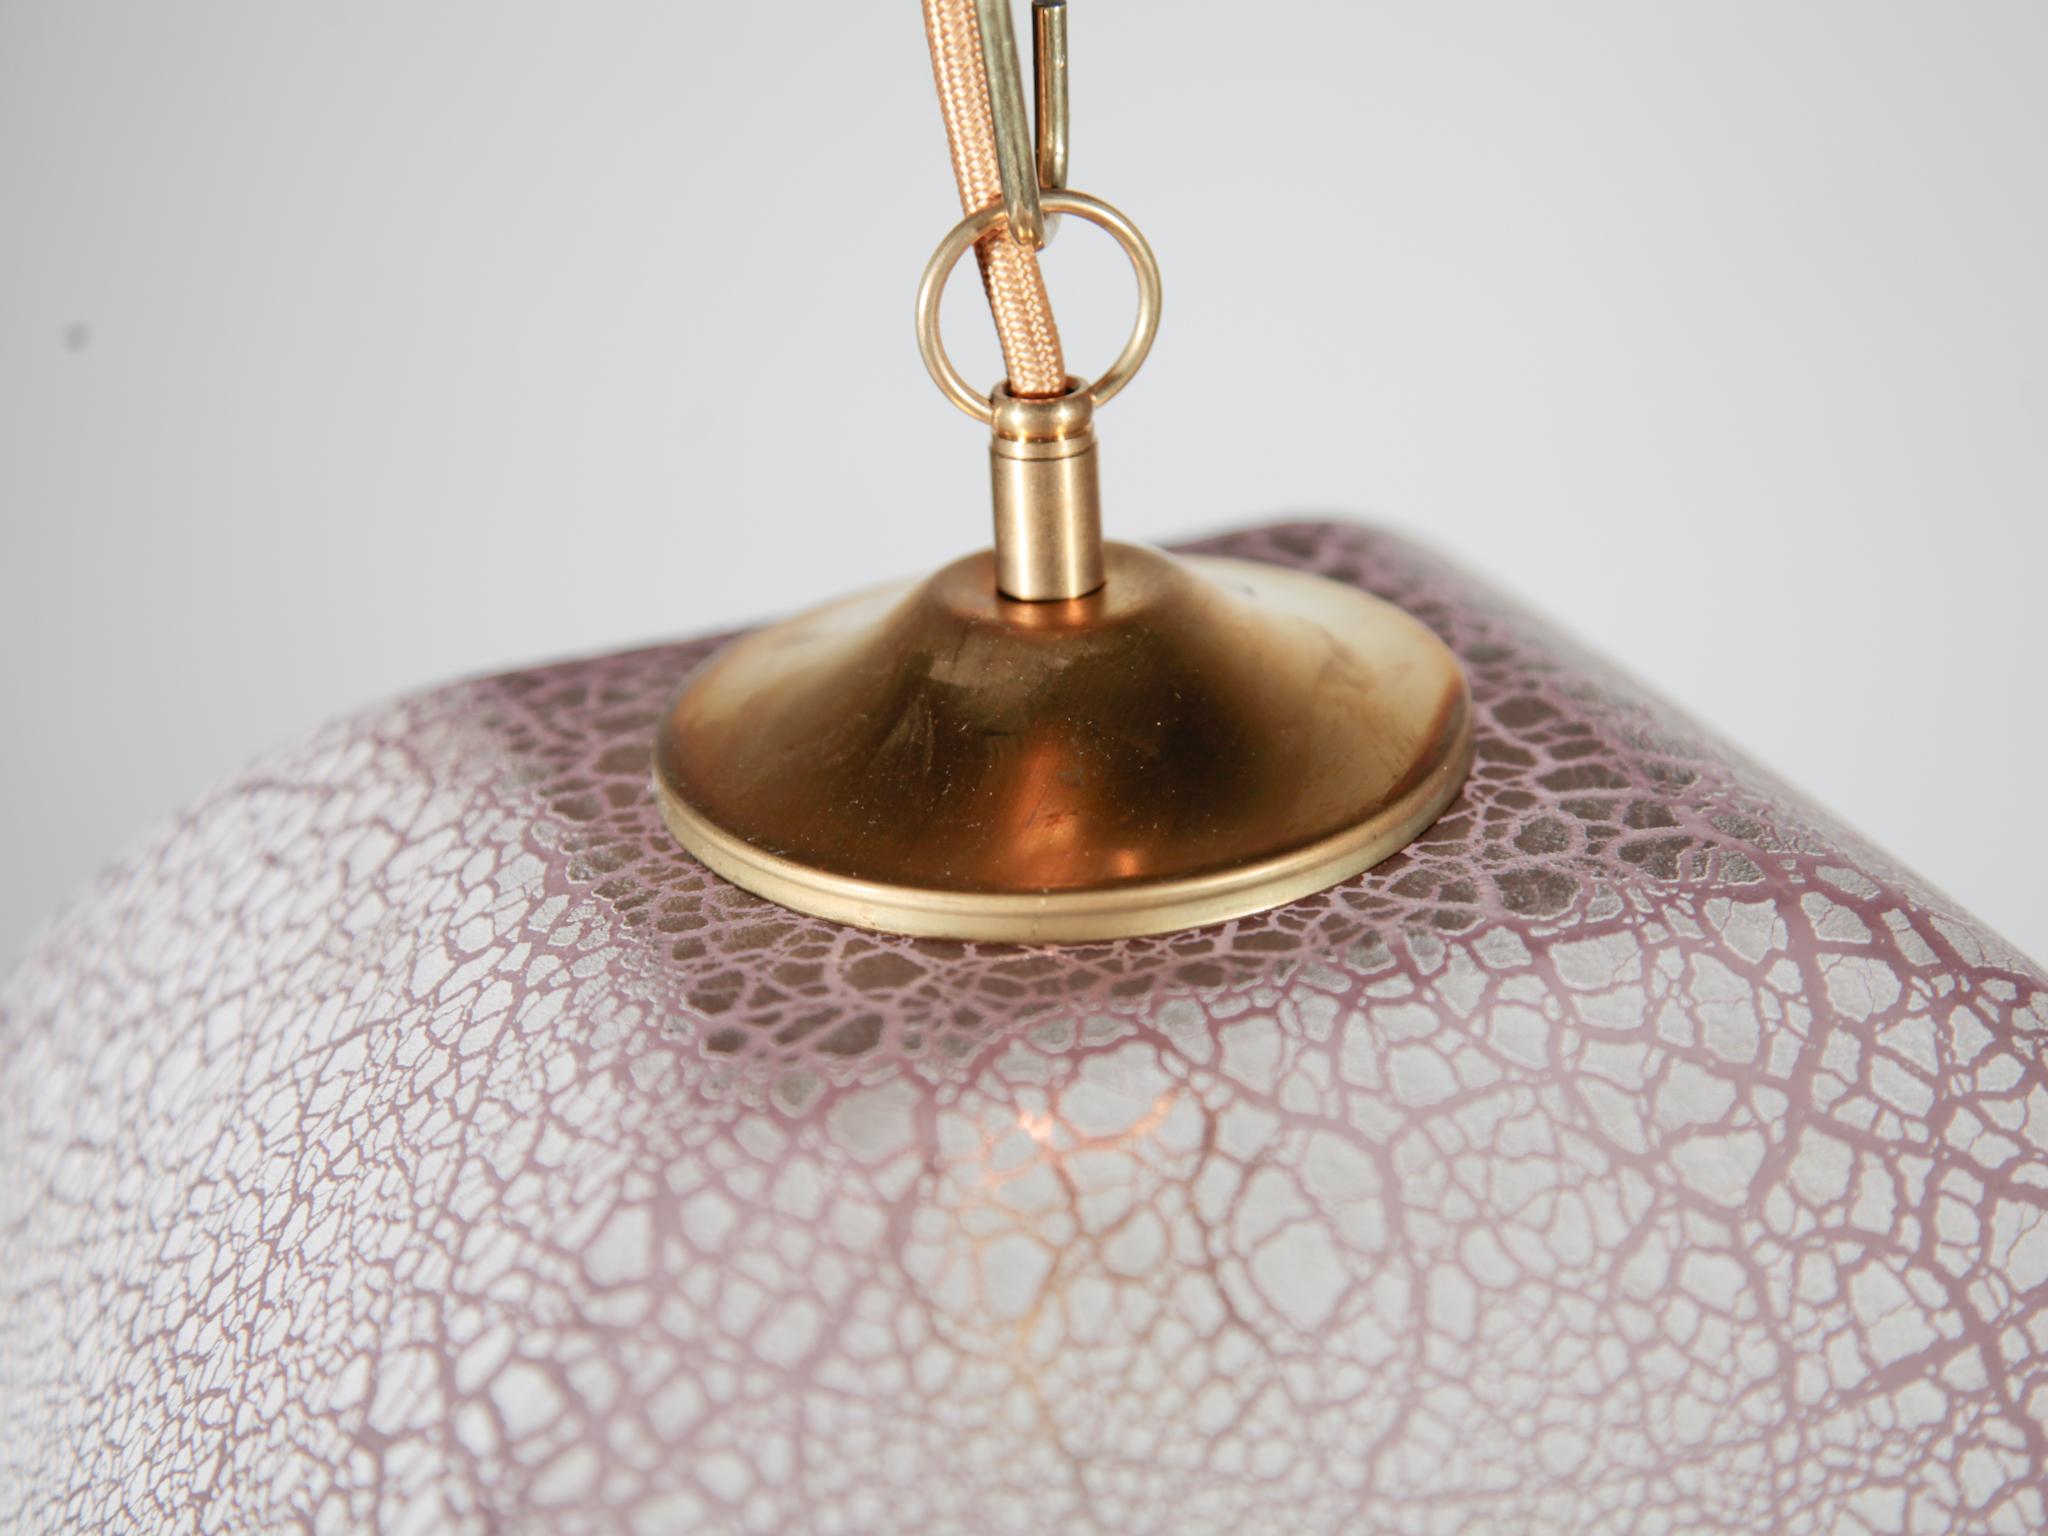 A beautiful piece of Murano Art glass pendant, hanging lamp with brass elements designed and signed by Alfredo Barbini, made in Italy. The design of the blown pink glass with the processed gray tones of the iron oxide craquelure in the glass gives